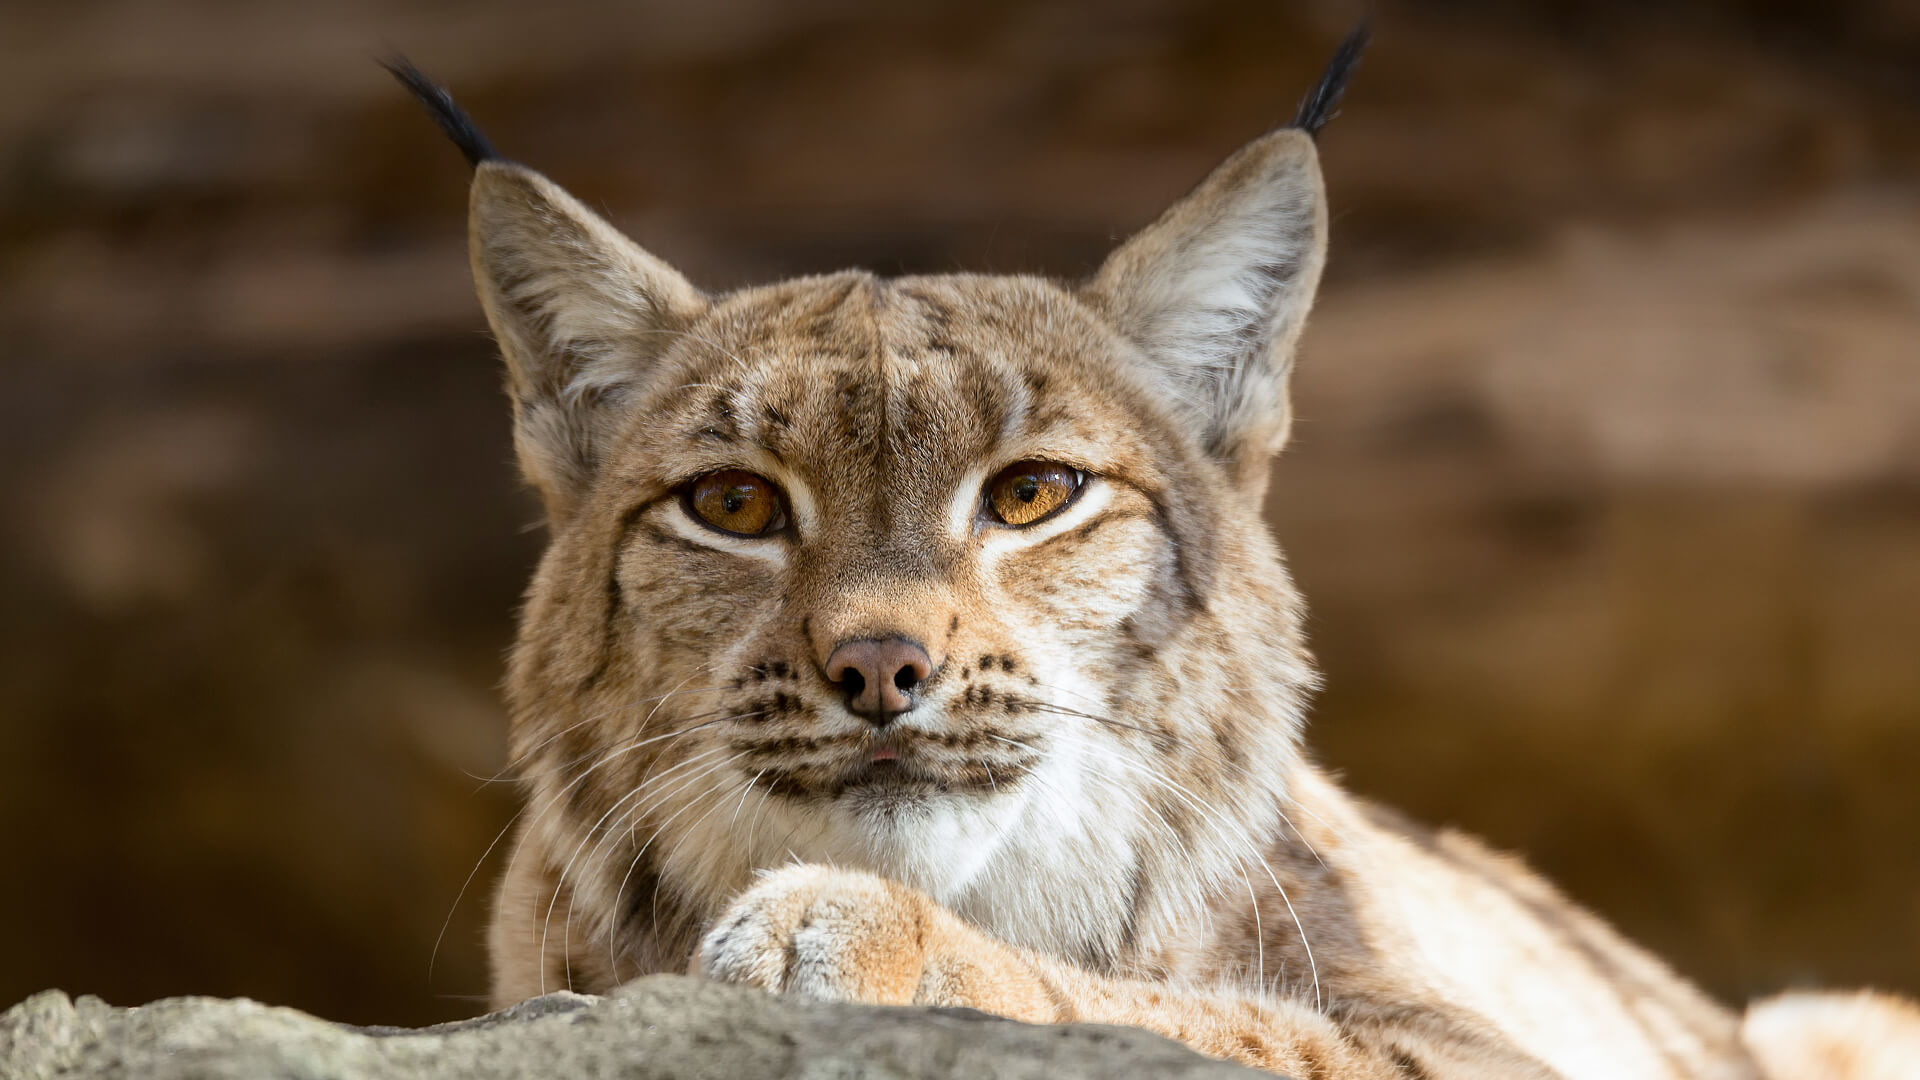 Close up of a lynx face as it looks slightly to the left with its eyes